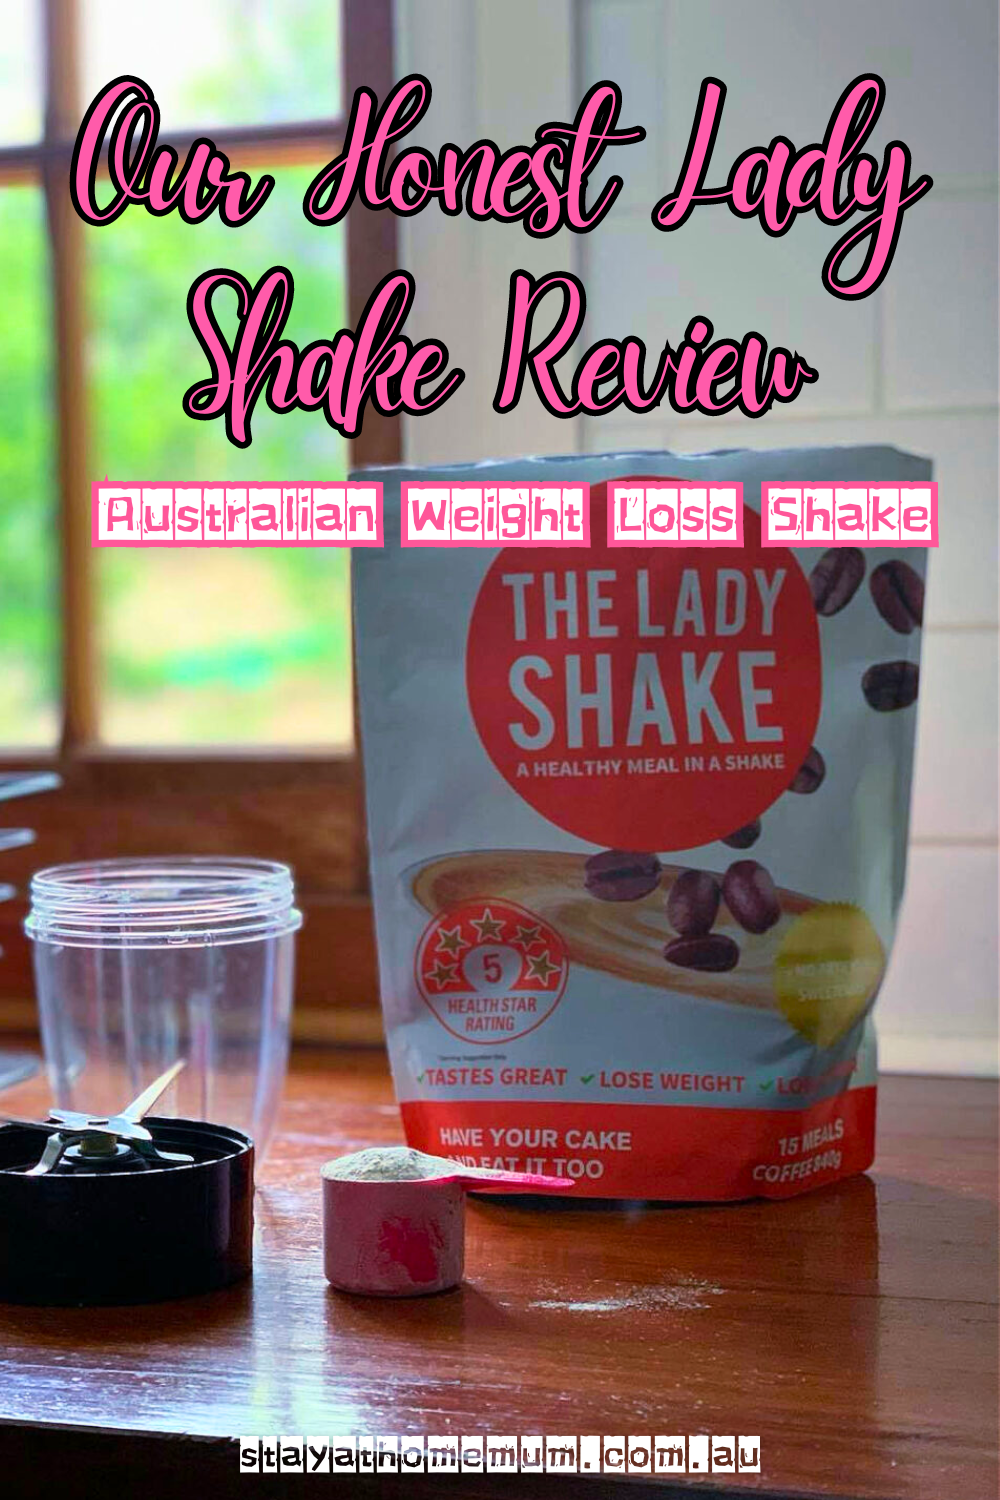 Our Honest Lady Shake Review – Australian Weight Loss Shake: MUST READ Pinnable